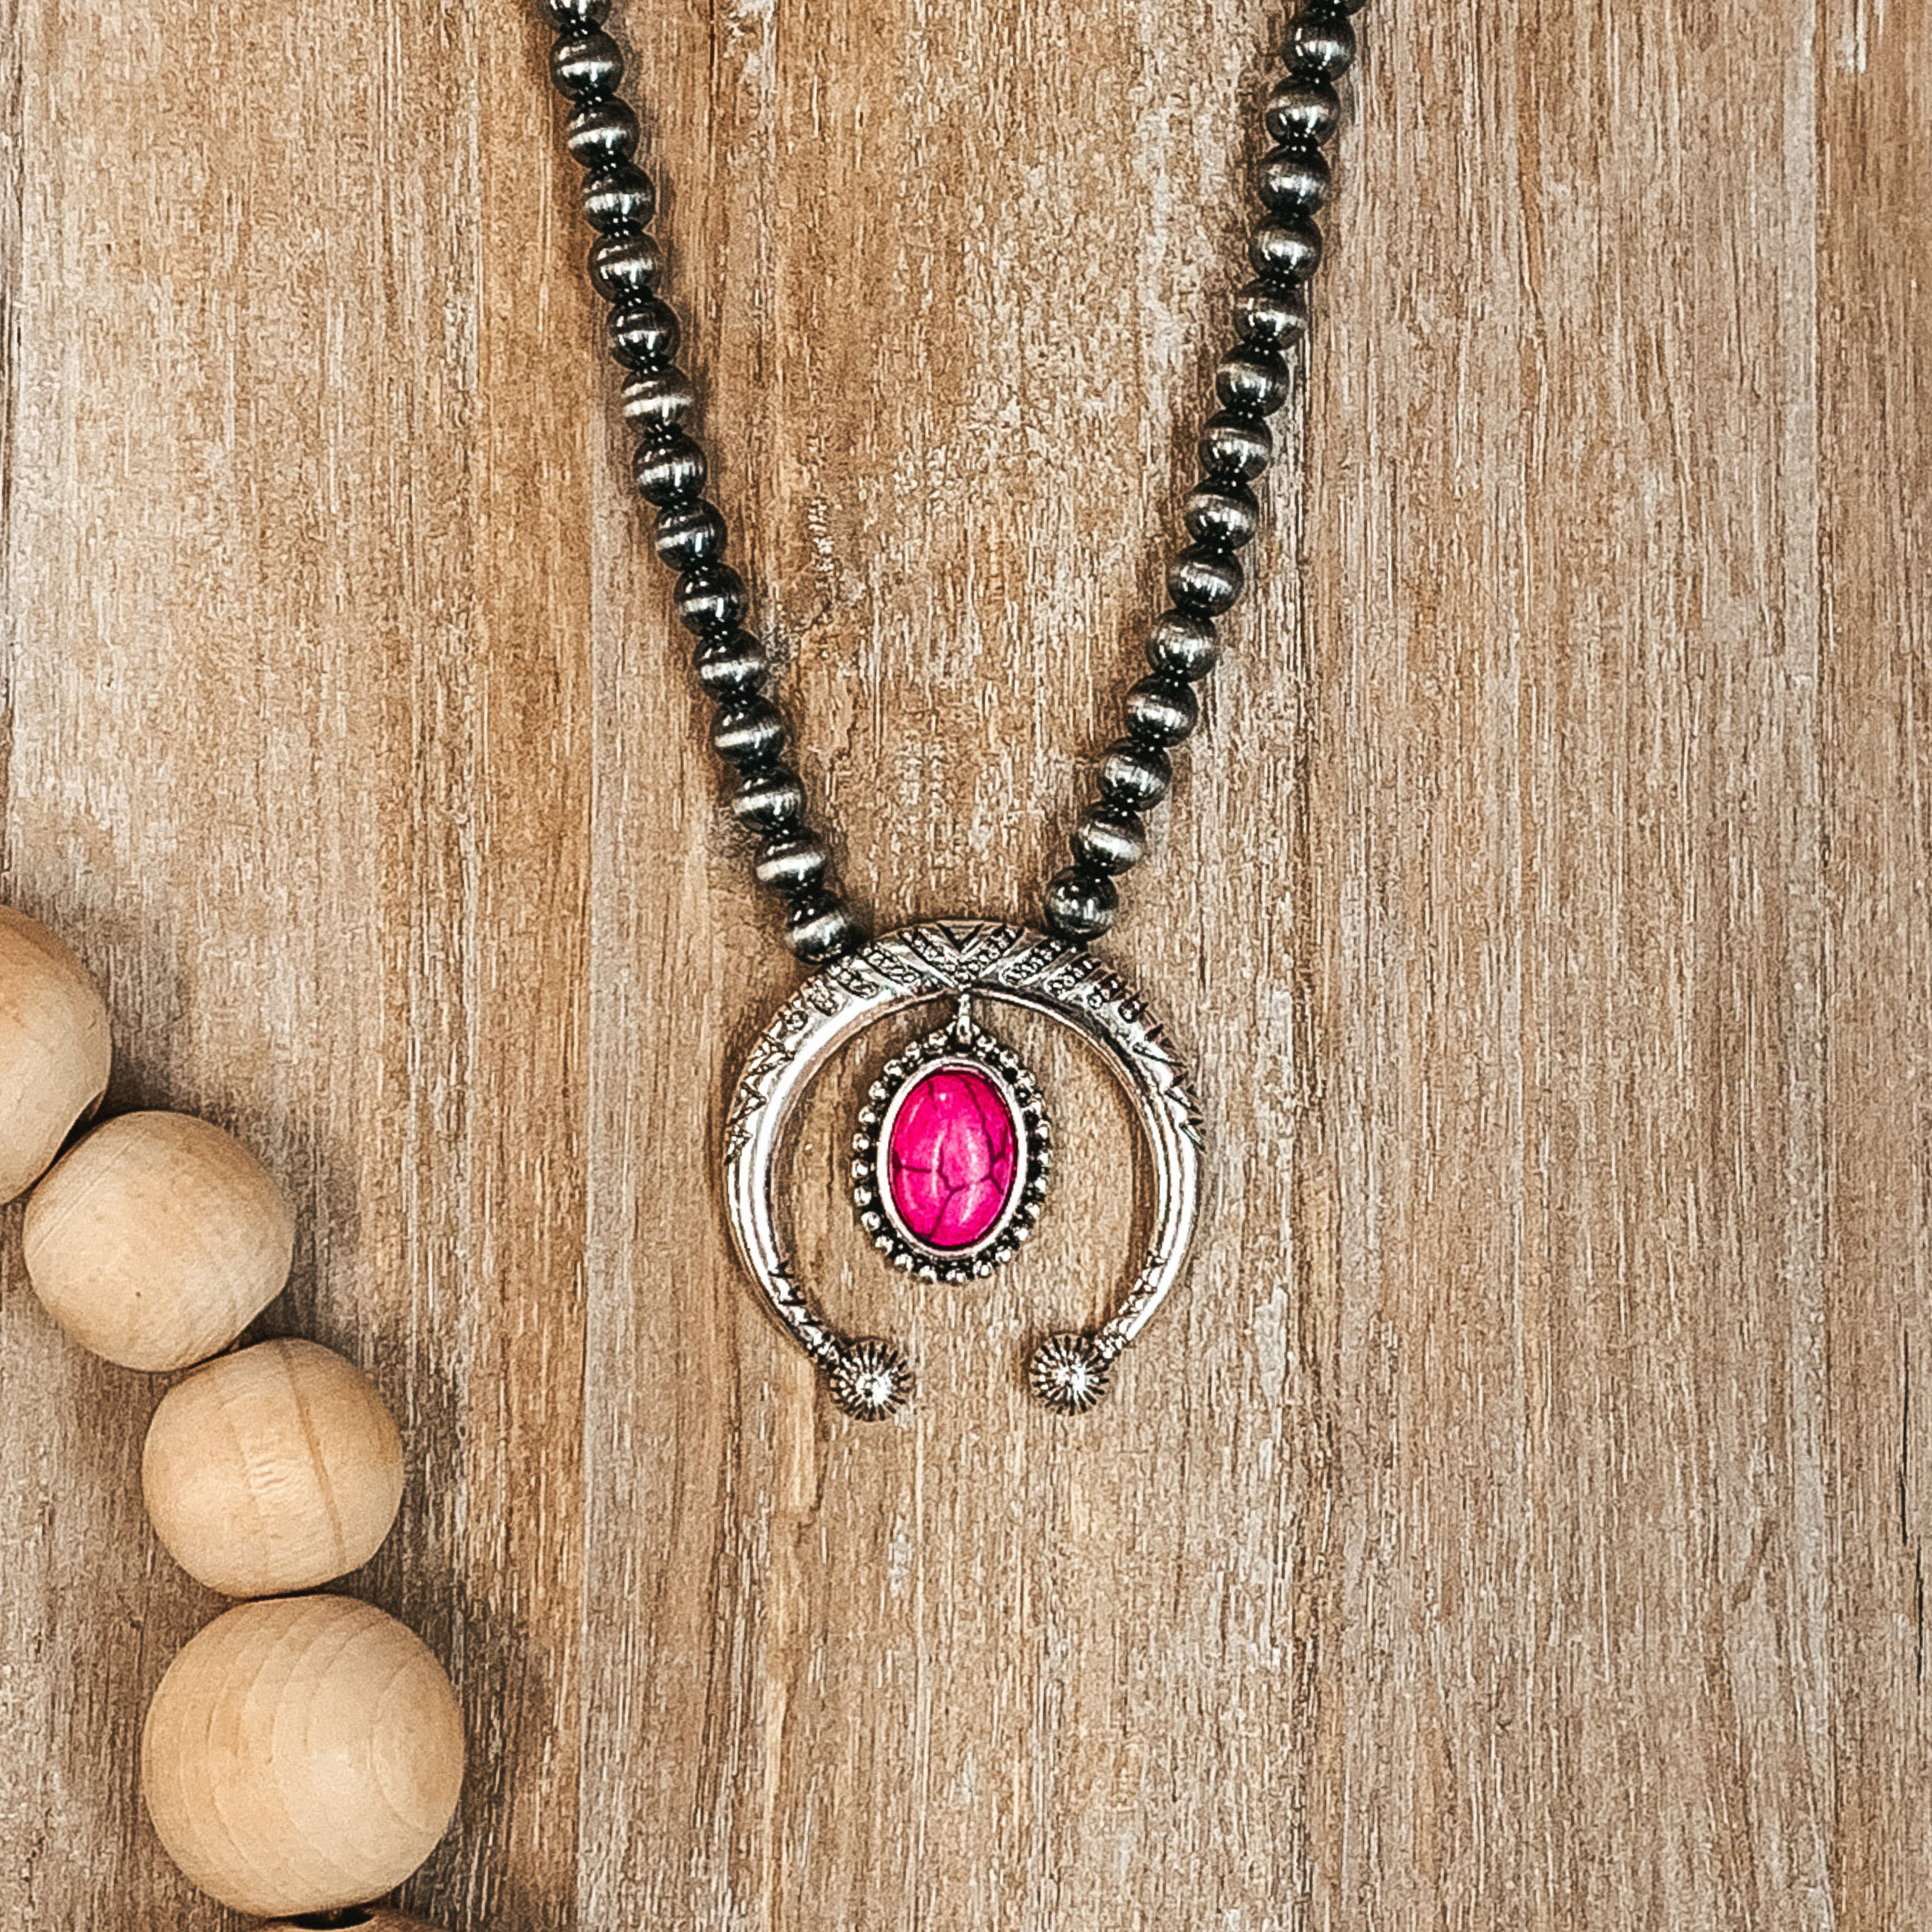 Squash Blossom with Oval Pendant and Navajo Inspired Pearl Necklace in Fuchsia - Giddy Up Glamour Boutique